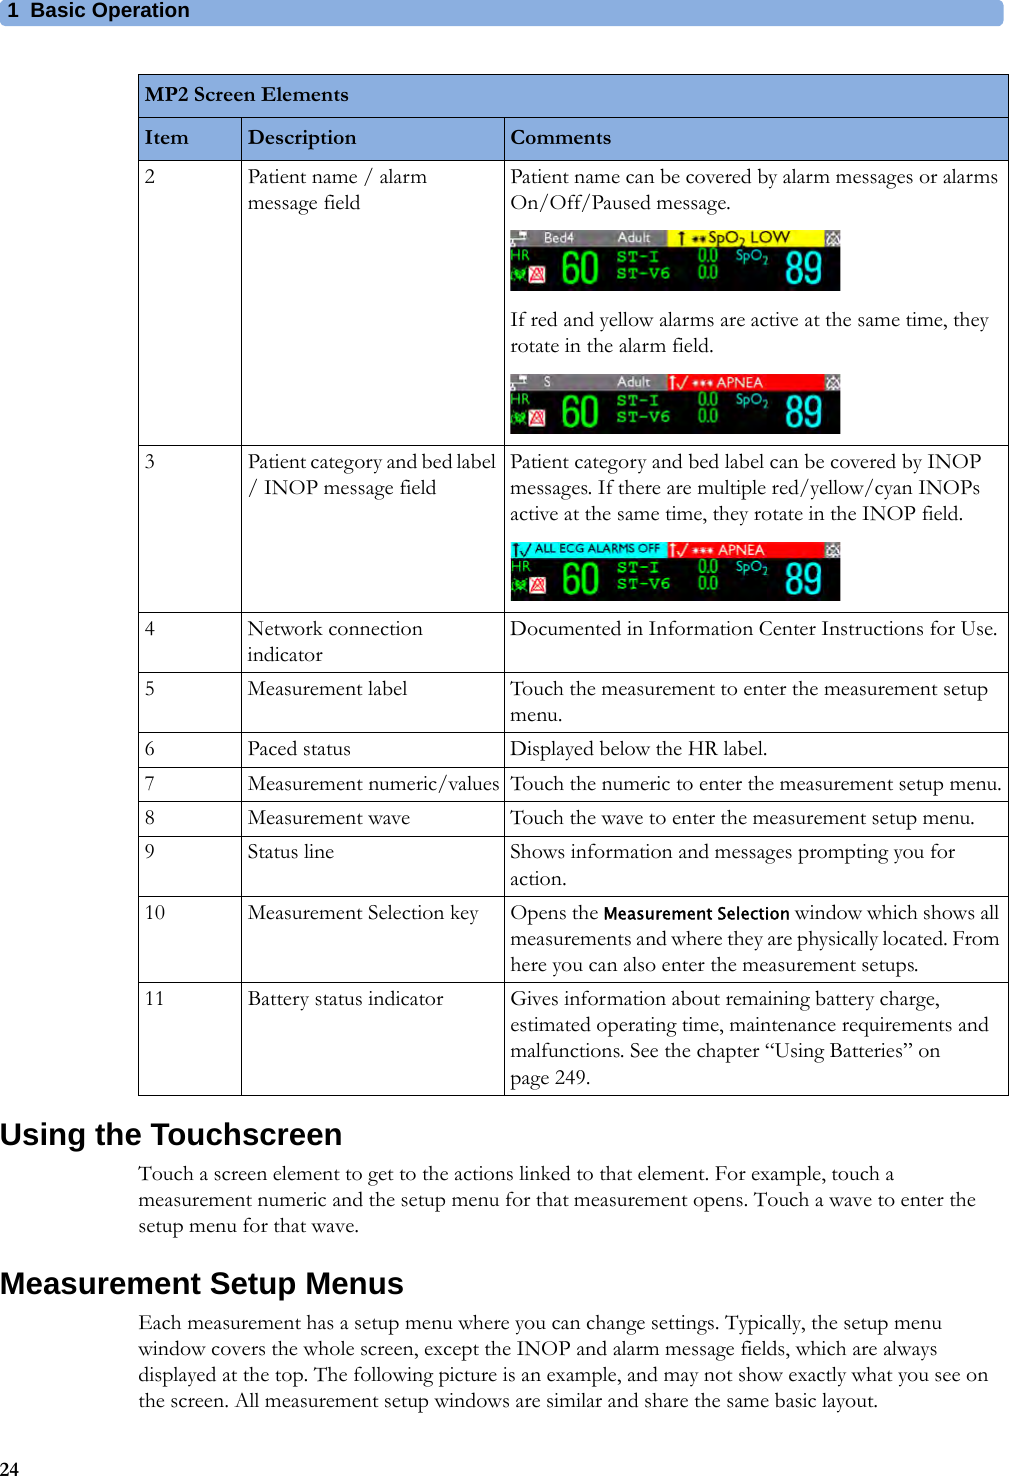 1 Basic Operation24Using the TouchscreenTouch a screen element to get to the actions linked to that element. For example, touch a measurement numeric and the setup menu for that measurement opens. Touch a wave to enter the setup menu for that wave.Measurement Setup MenusEach measurement has a setup menu where you can change settings. Typically, the setup menu window covers the whole screen, except the INOP and alarm message fields, which are always displayed at the top. The following picture is an example, and may not show exactly what you see on the screen. All measurement setup windows are similar and share the same basic layout.2 Patient name / alarm message fieldPatient name can be covered by alarm messages or alarms On/Off/Paused message.If red and yellow alarms are active at the same time, they rotate in the alarm field.3 Patient category and bed label / INOP message fieldPatient category and bed label can be covered by INOP messages. If there are multiple red/yellow/cyan INOPs active at the same time, they rotate in the INOP field.4 Network connection indicatorDocumented in Information Center Instructions for Use.5 Measurement label Touch the measurement to enter the measurement setup menu.6 Paced status Displayed below the HR label.7 Measurement numeric/values Touch the numeric to enter the measurement setup menu.8 Measurement wave Touch the wave to enter the measurement setup menu.9 Status line Shows information and messages prompting you for action.10 Measurement Selection key Opens the Measurement Selection window which shows all measurements and where they are physically located. From here you can also enter the measurement setups.11 Battery status indicator Gives information about remaining battery charge, estimated operating time, maintenance requirements and malfunctions. See the chapter “Using Batteries” on page 249.MP2 Screen ElementsItem Description Comments